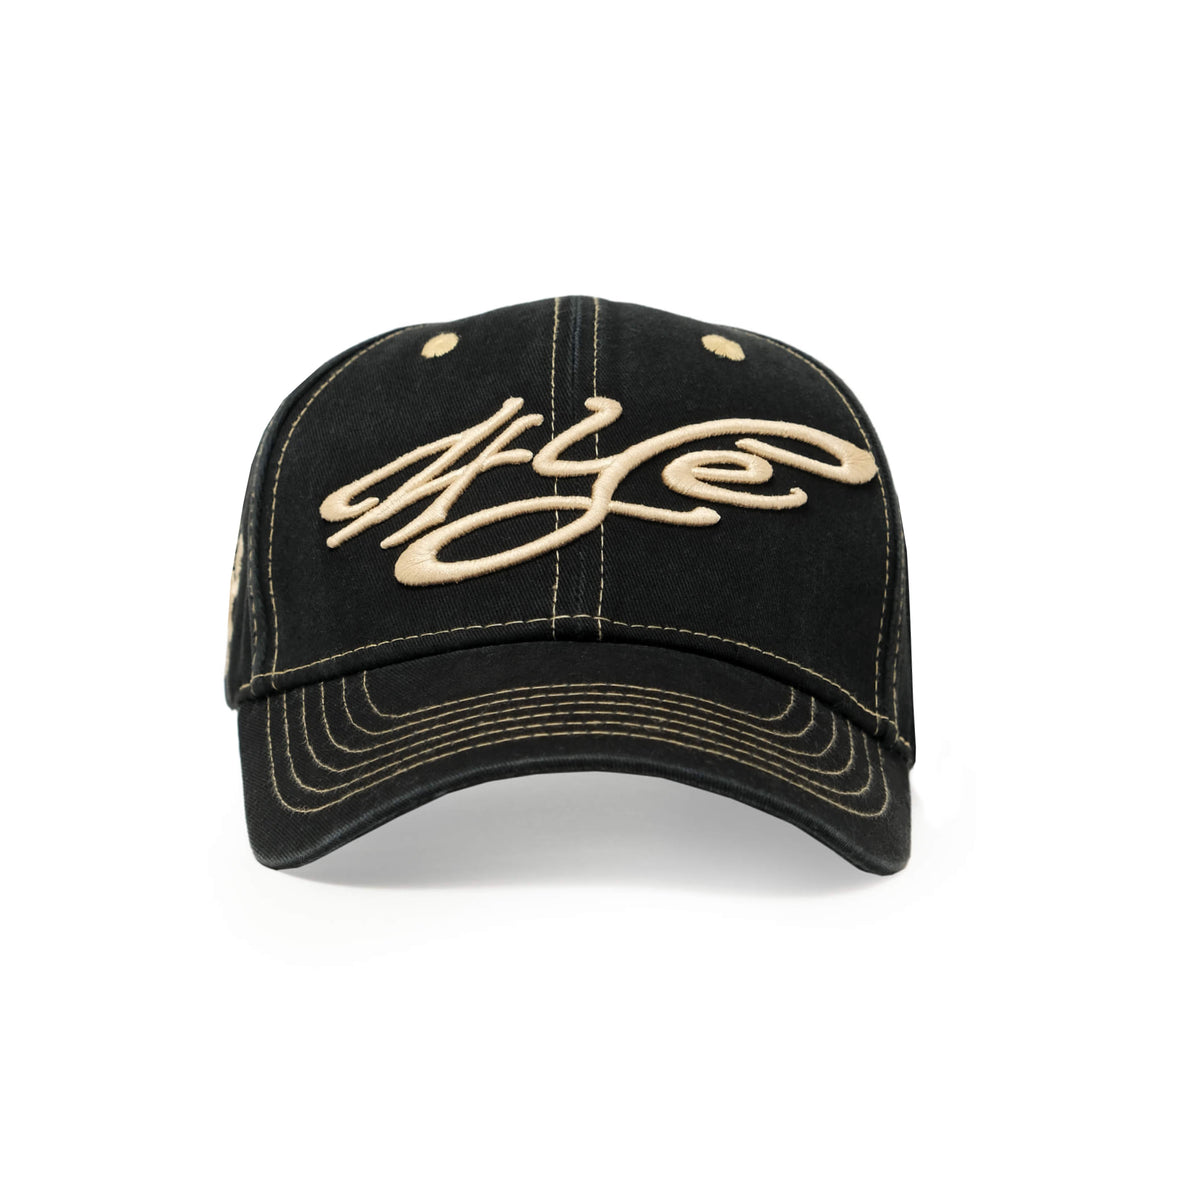 Front view of signature logo low pro in faded black. Front view highlights the 3-D signature logo stitching and contrast stitching in gold.